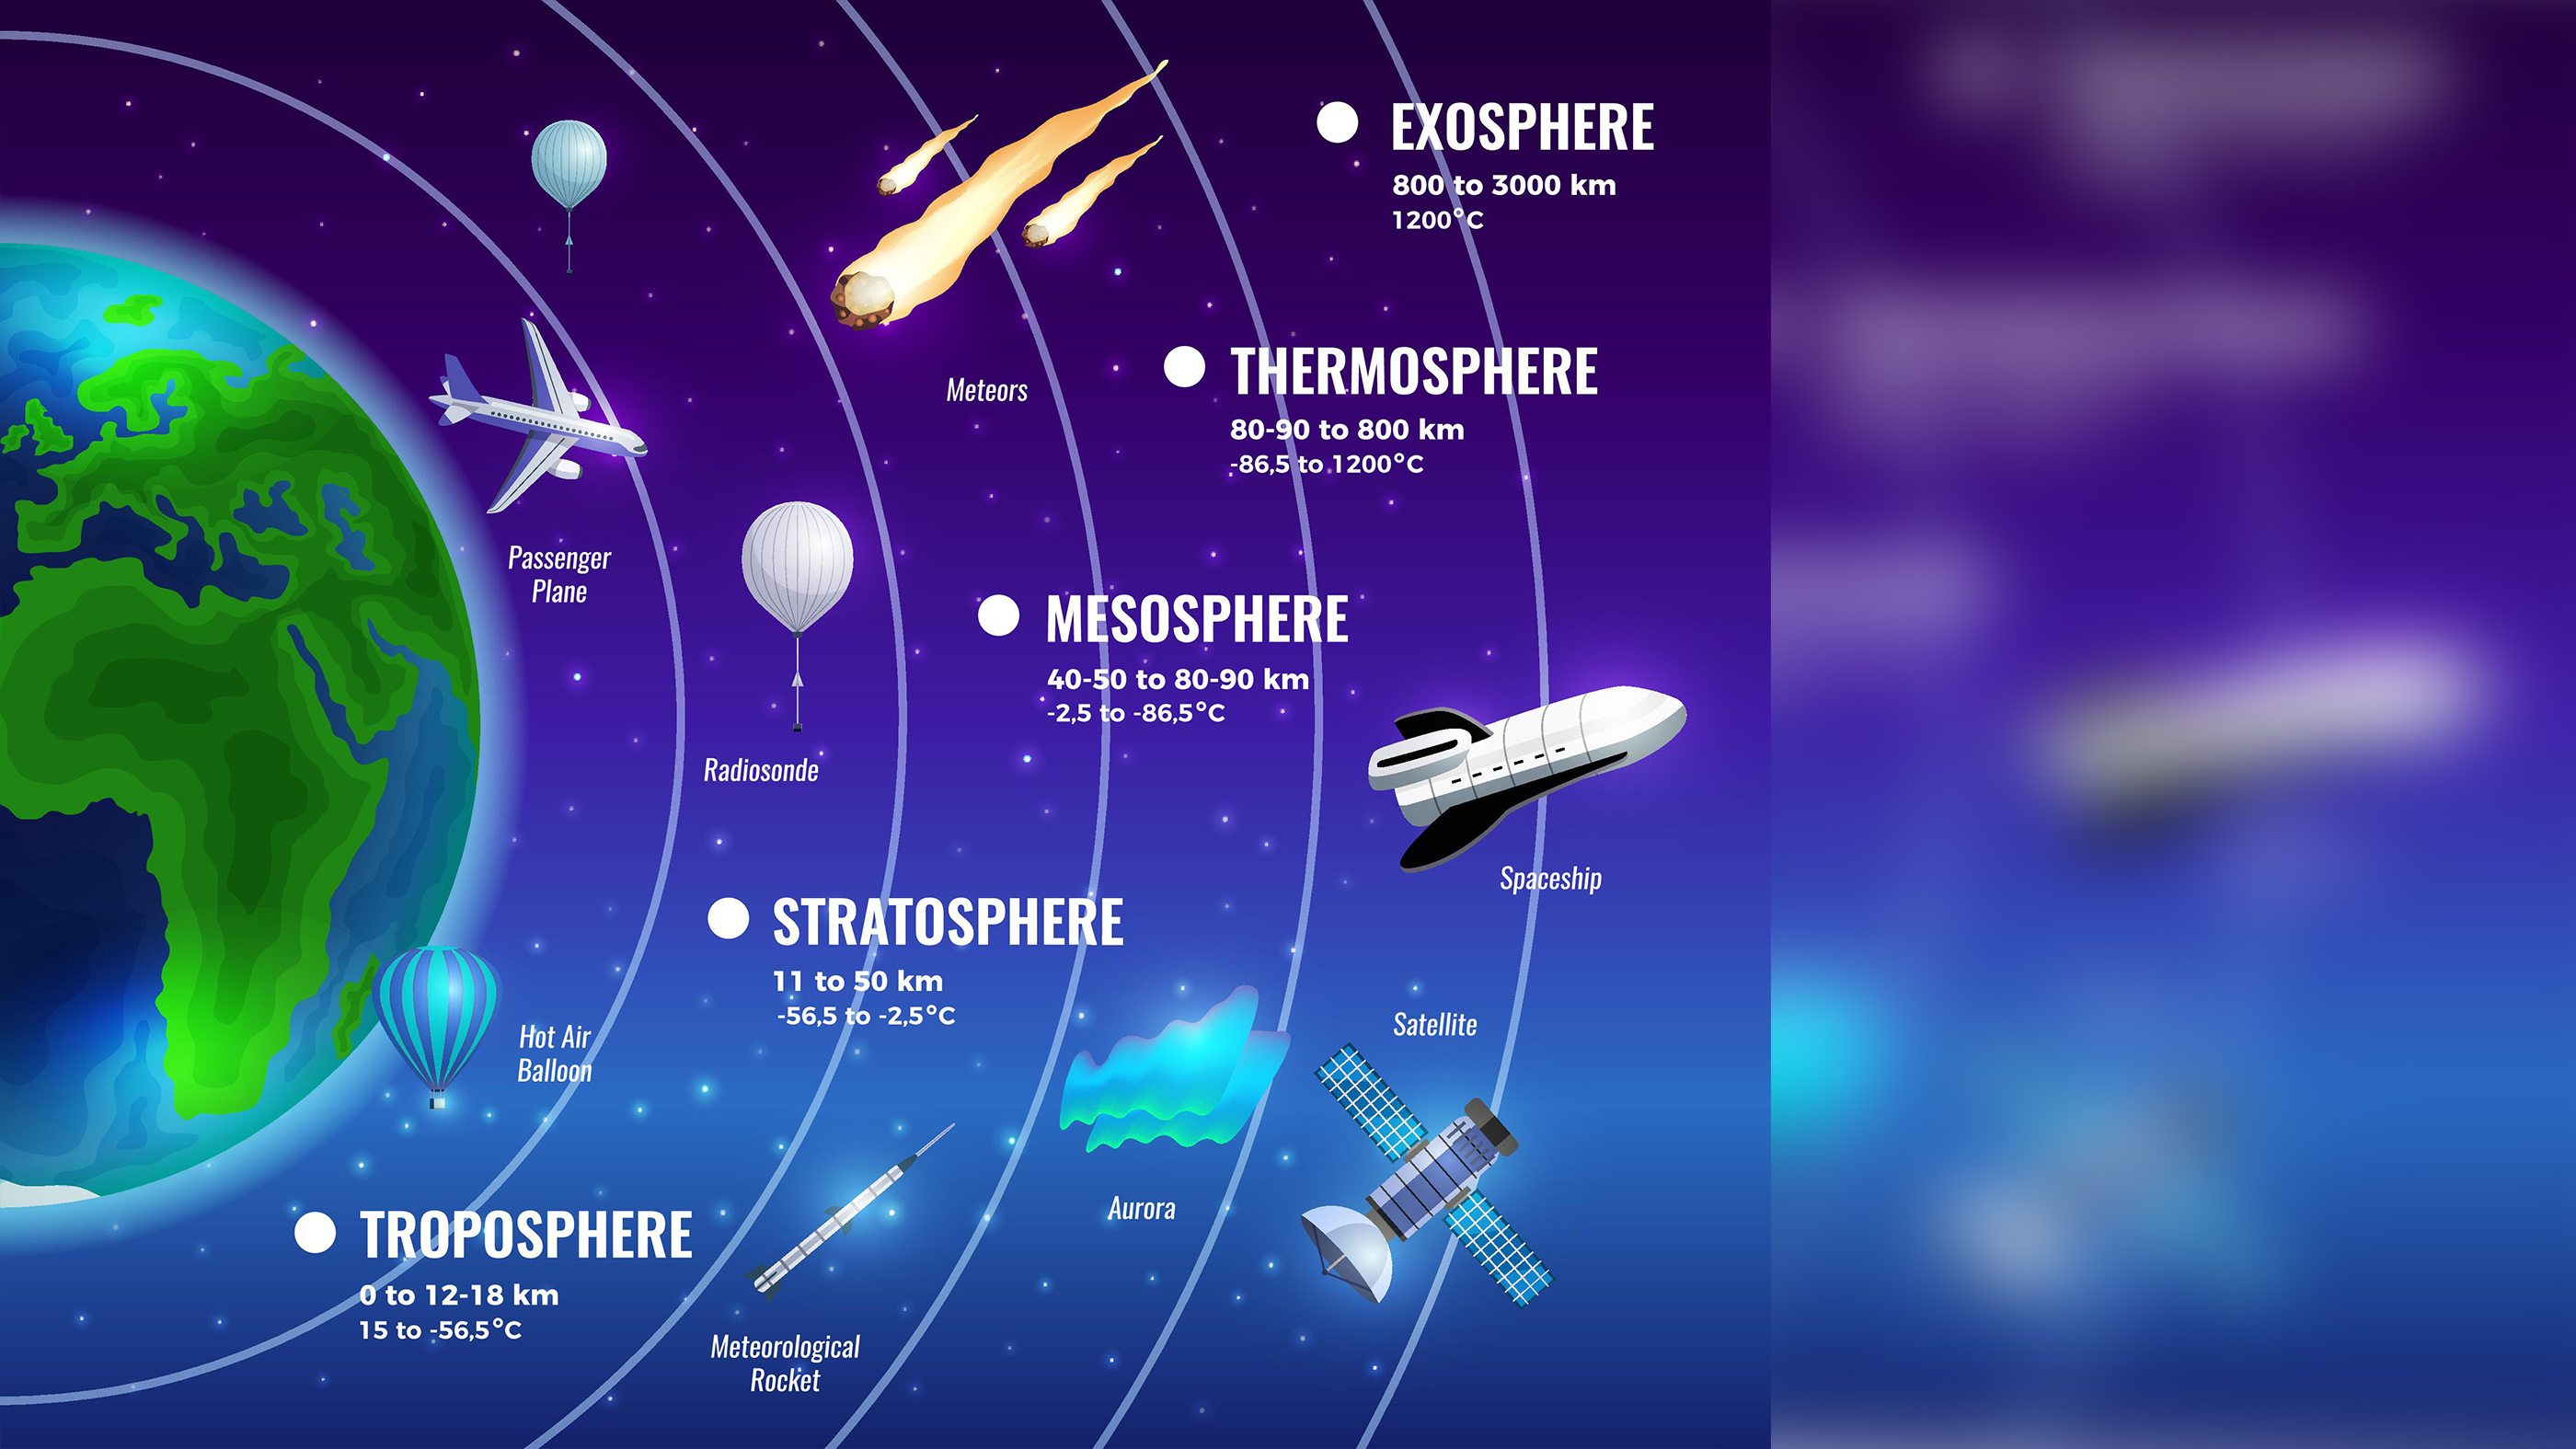 Layers of Earth’s atmosphere shown on this infographic.